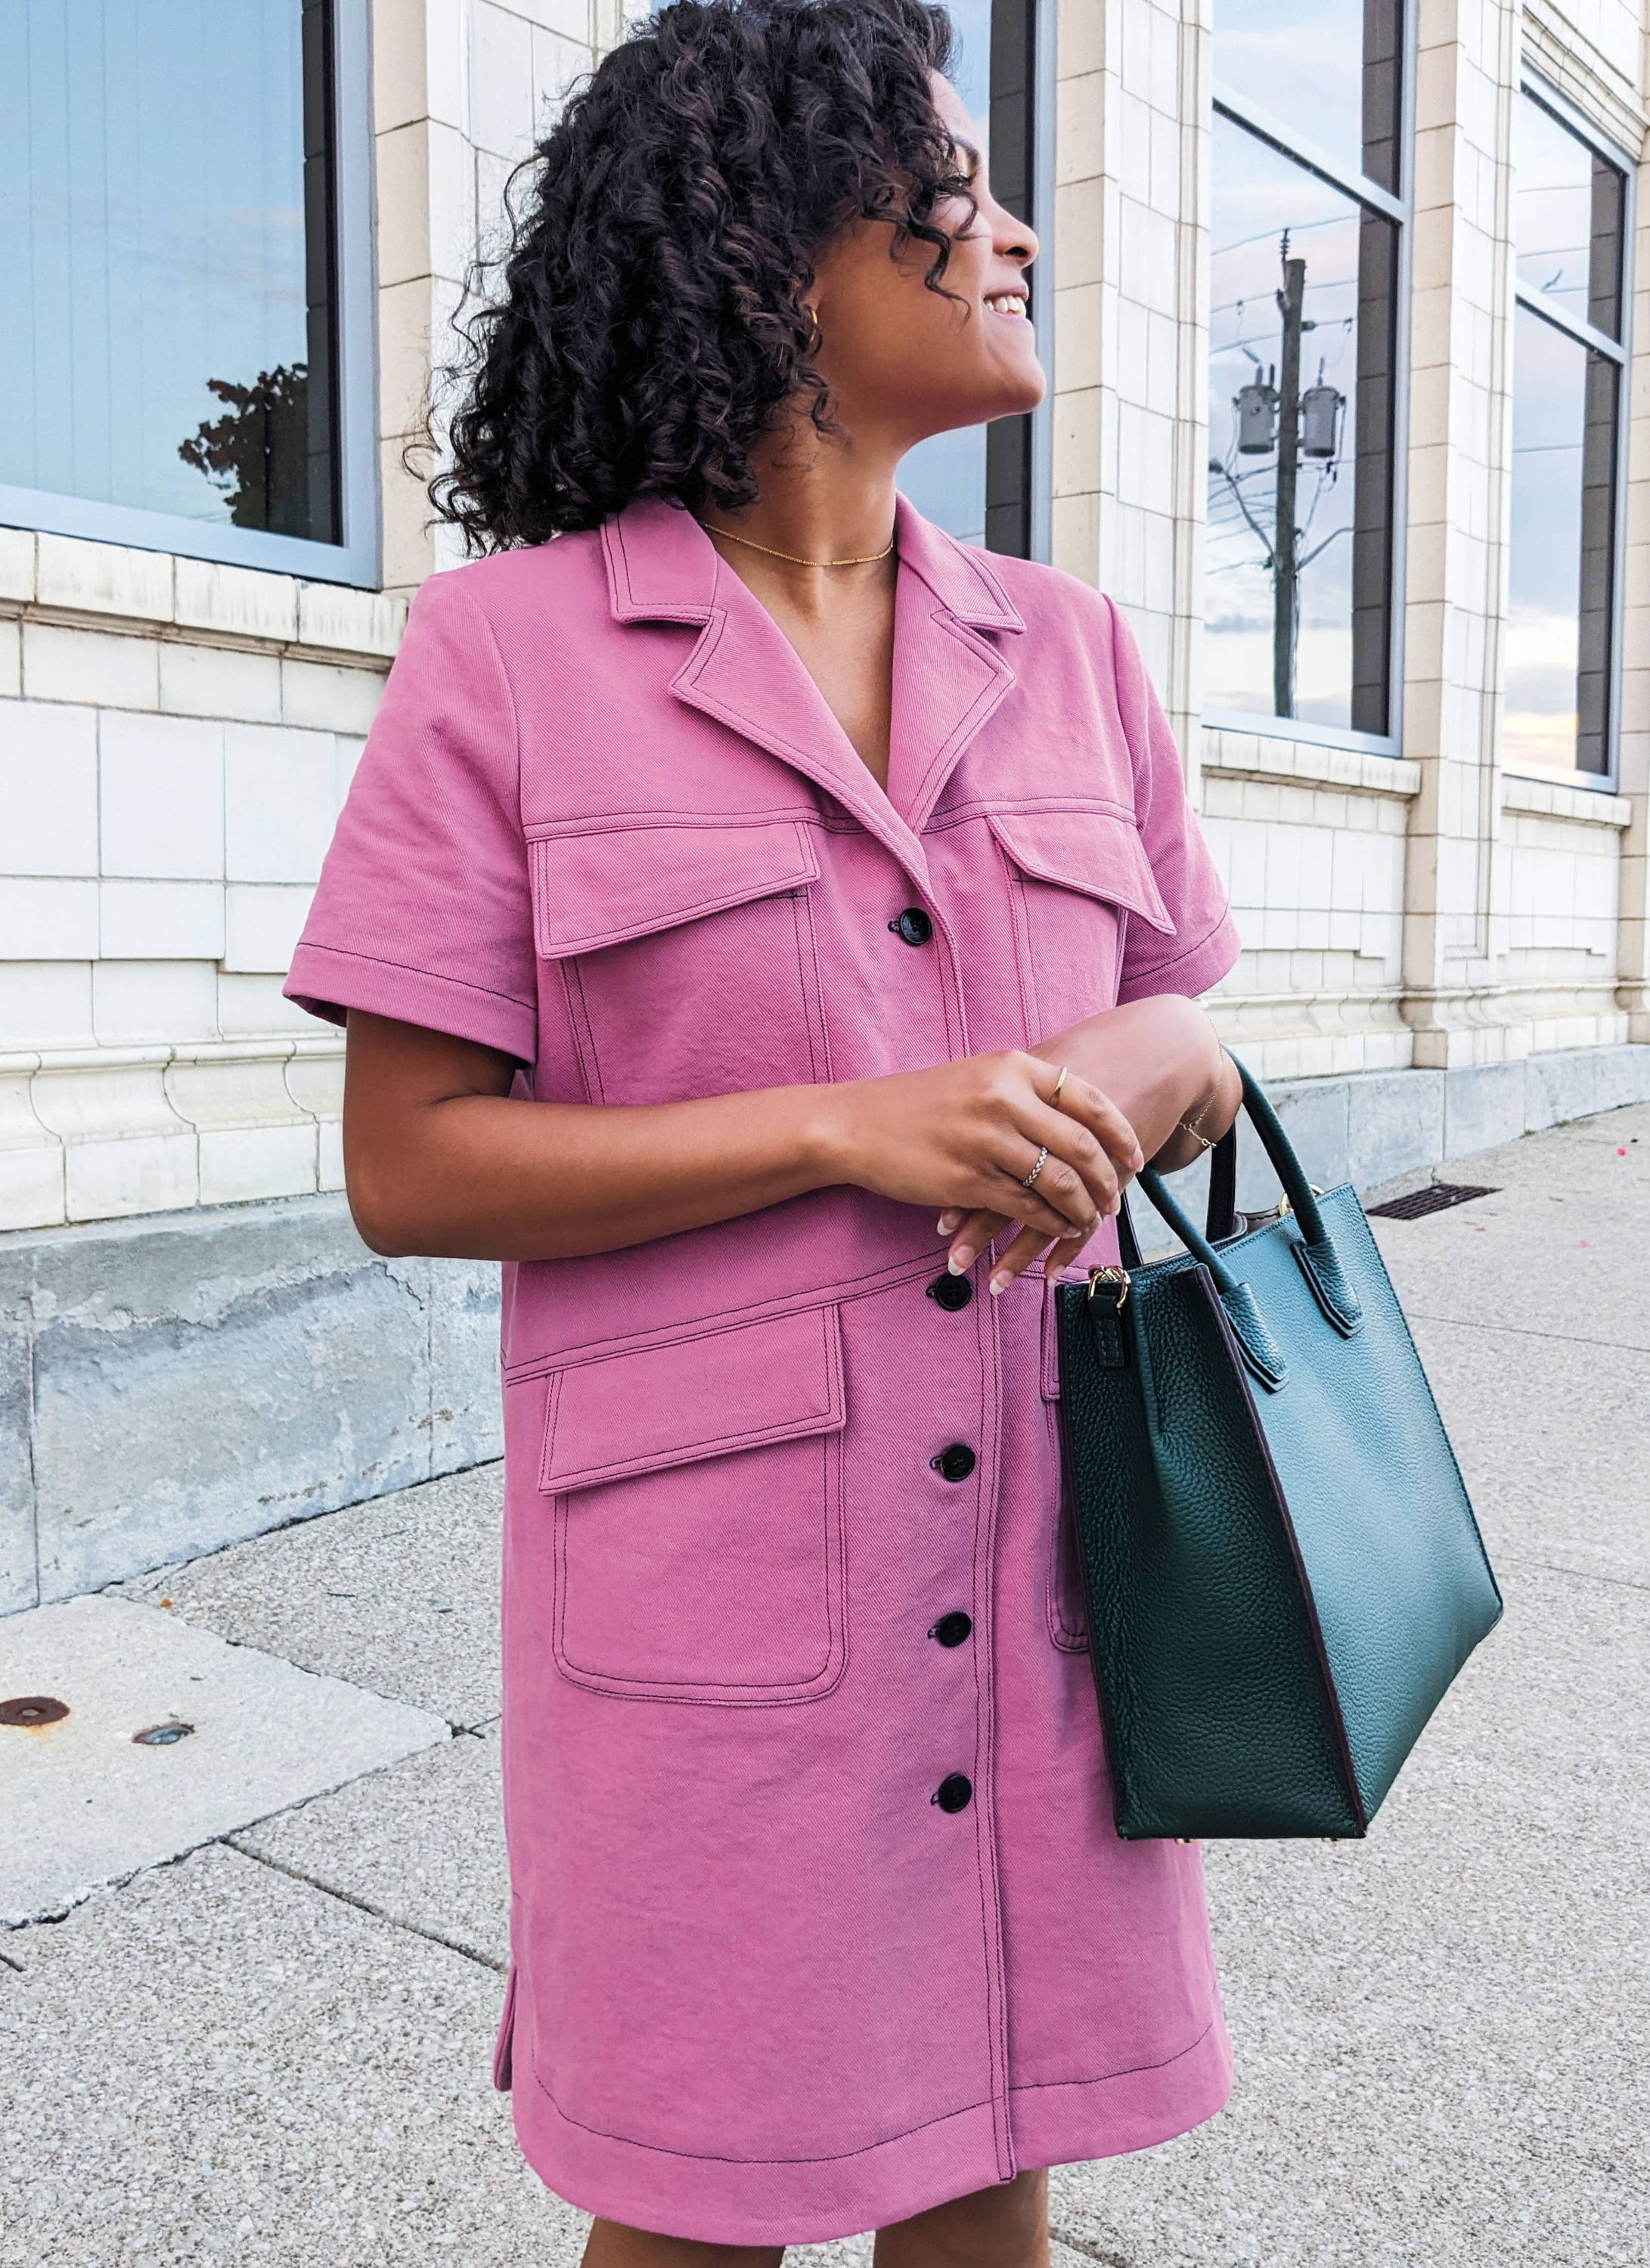 Woman with curly hair wearing a pink dress and black handbag